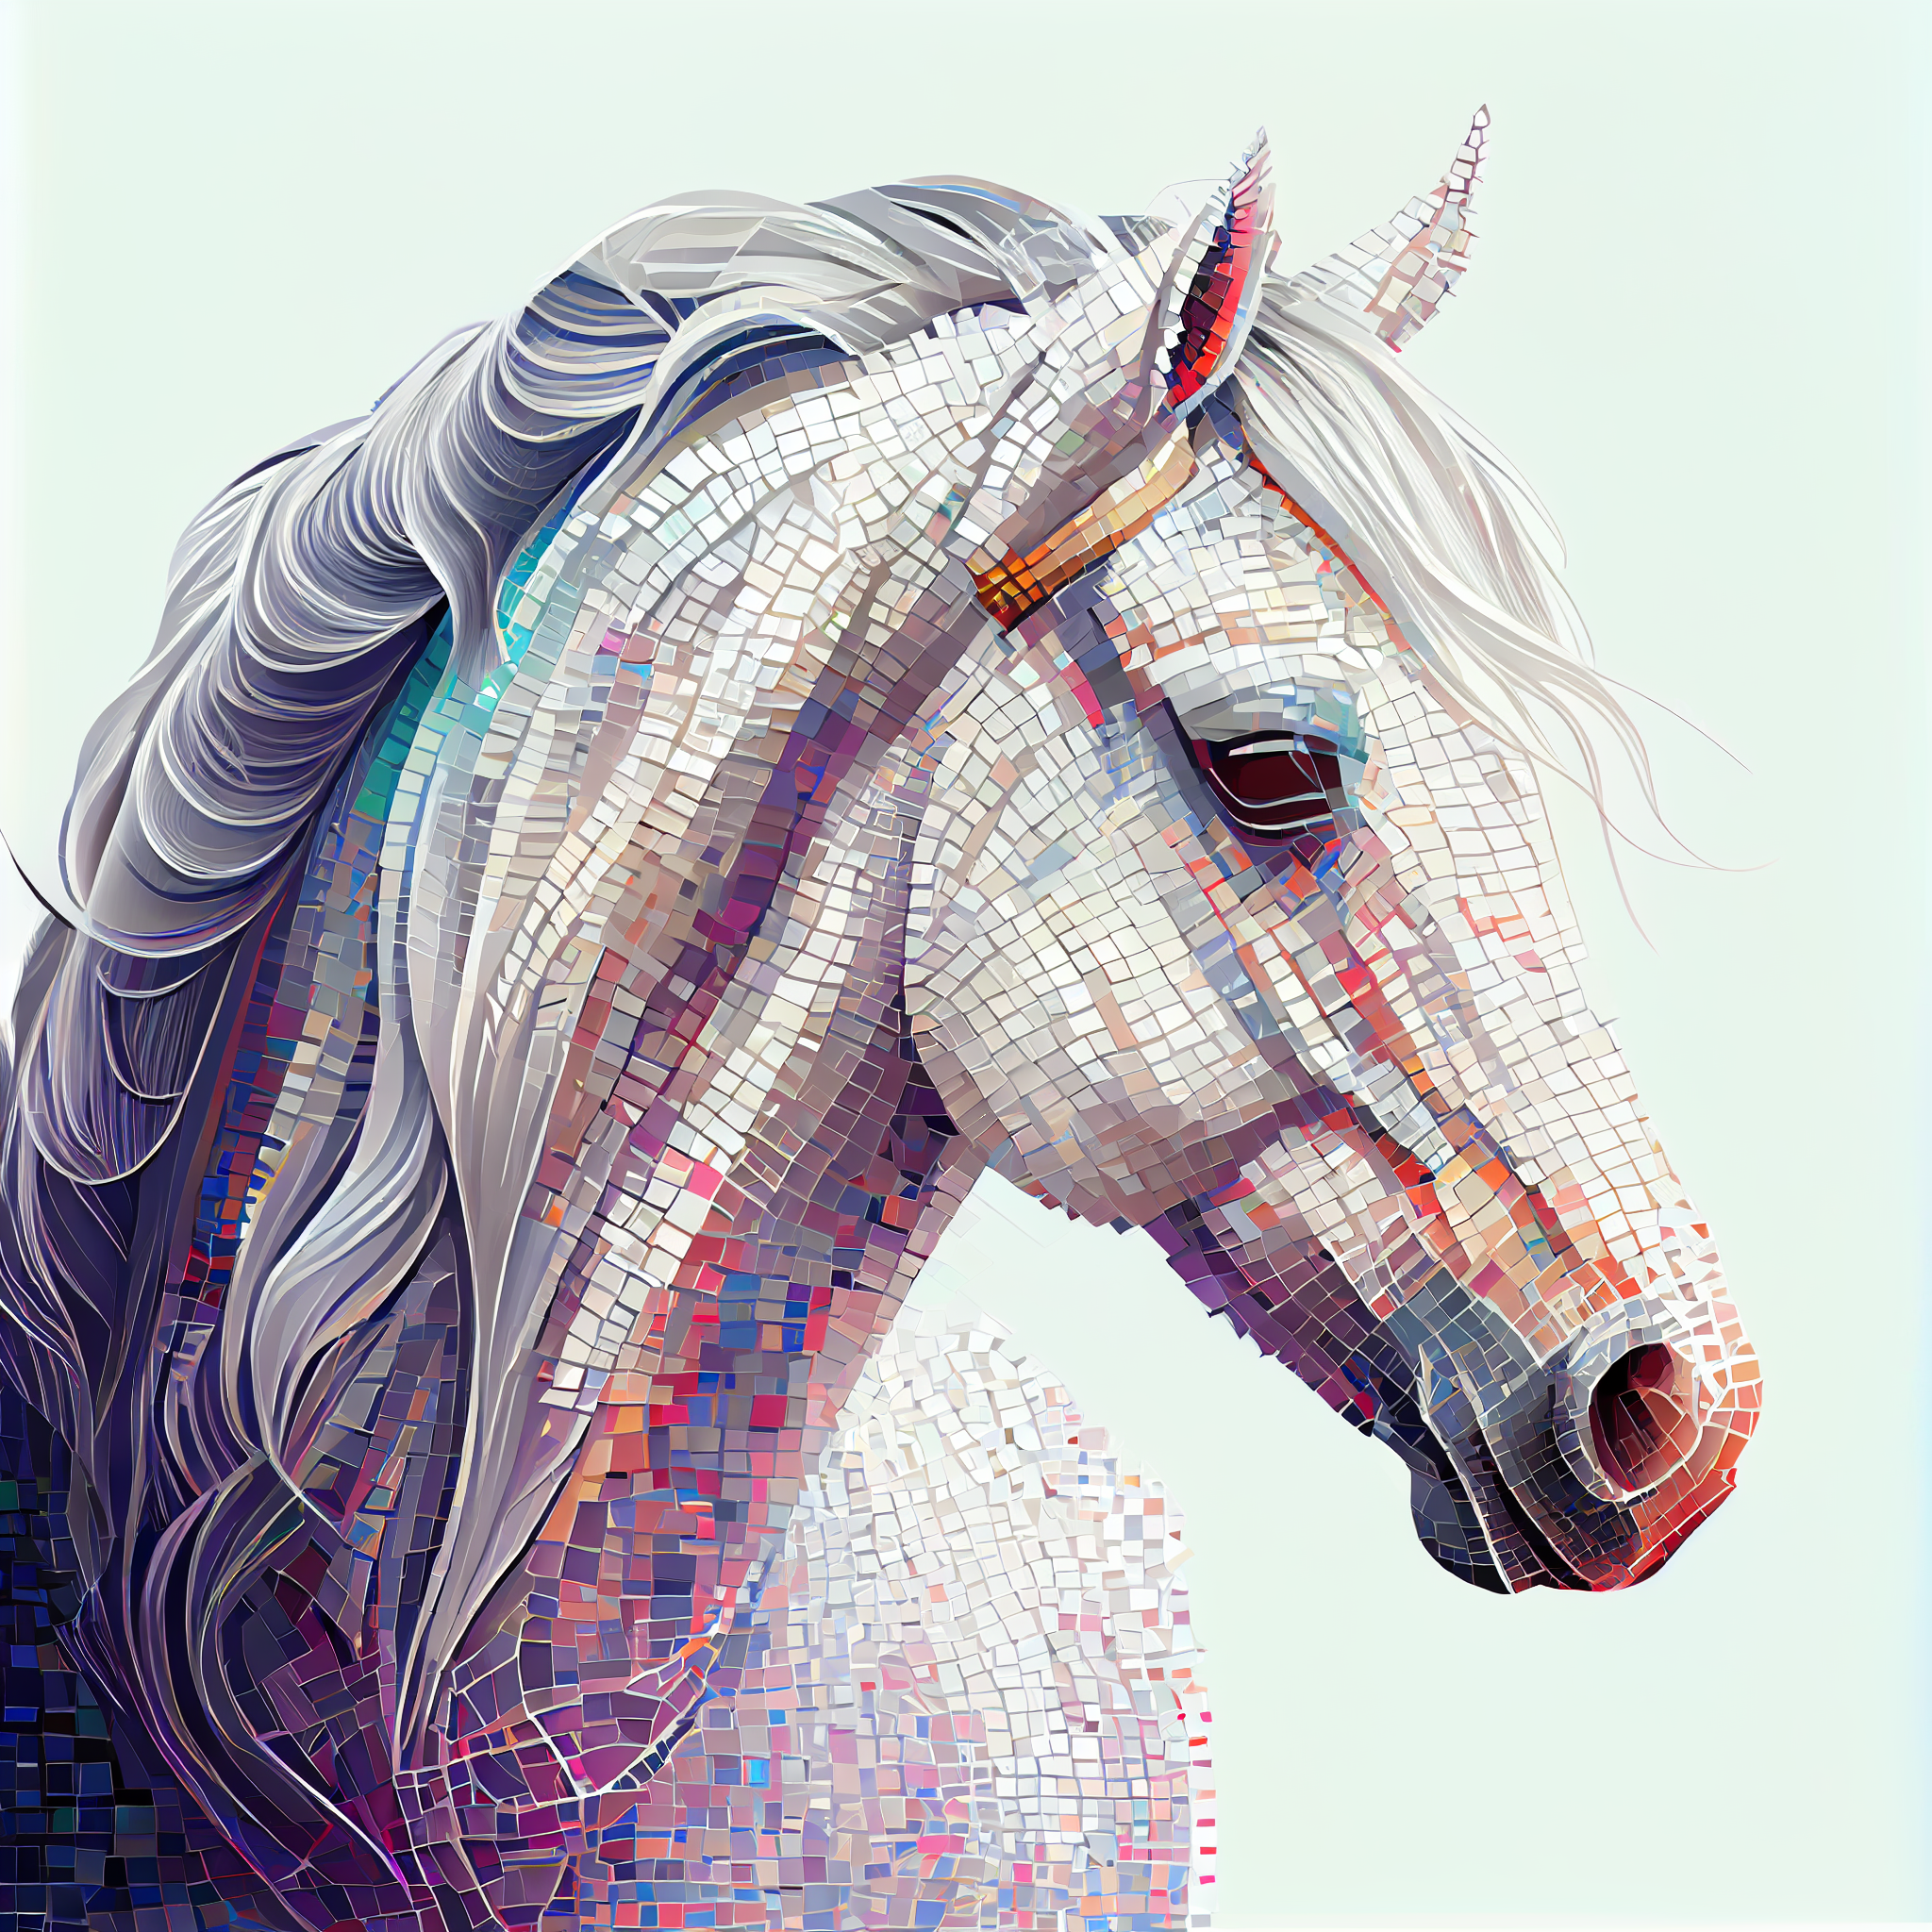 Chromatic Equine: A Mosaic Art Portrait of a Colorful White Horse